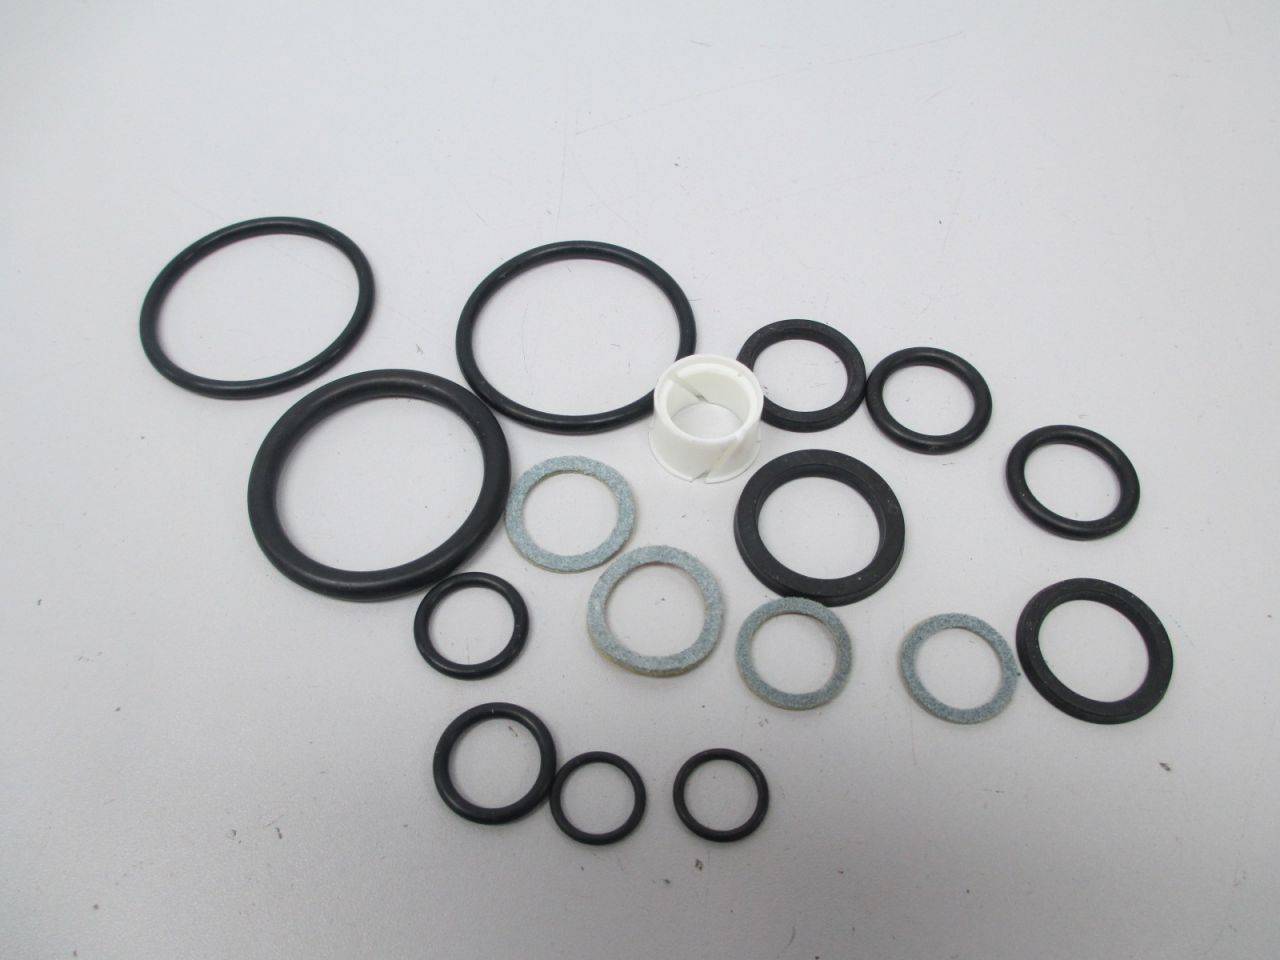 Allenair CH-P Seal Kit For Model CH-F-LH Forward Directional Cylinder